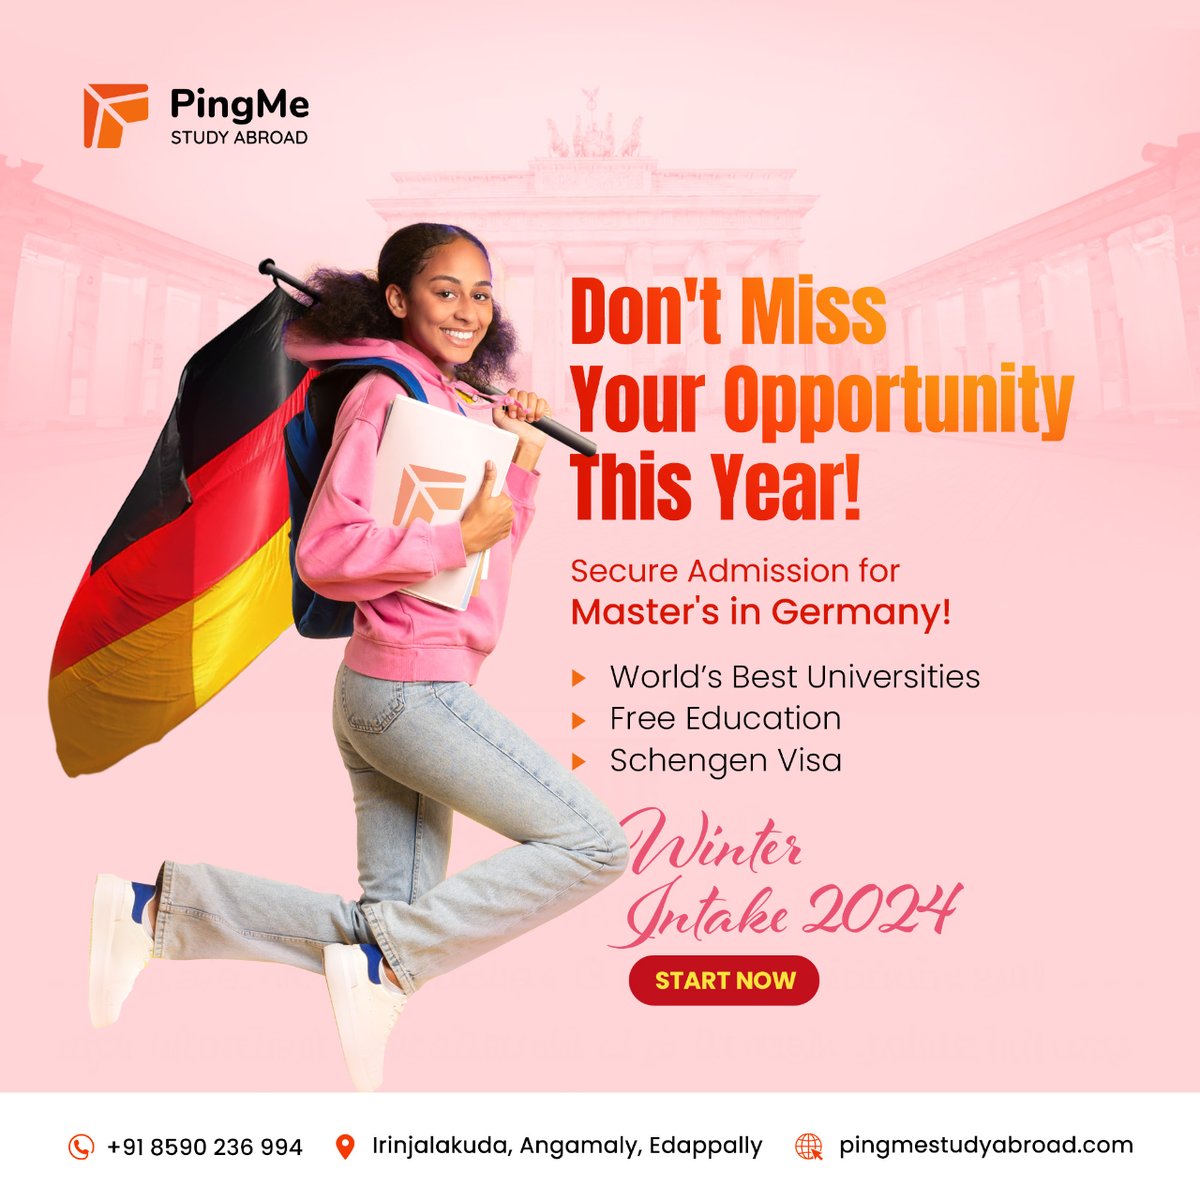 Ready to pursue your Master's in Germany? Secure your spot with PingMe! Experience world-class education, tuition-free, and breeze through visa procedures with Schengen Visa assistance. Winter Intake 2024 - Apply Now

📞+91 9074868545

#pingmestudyabroad #studyingermany #germany